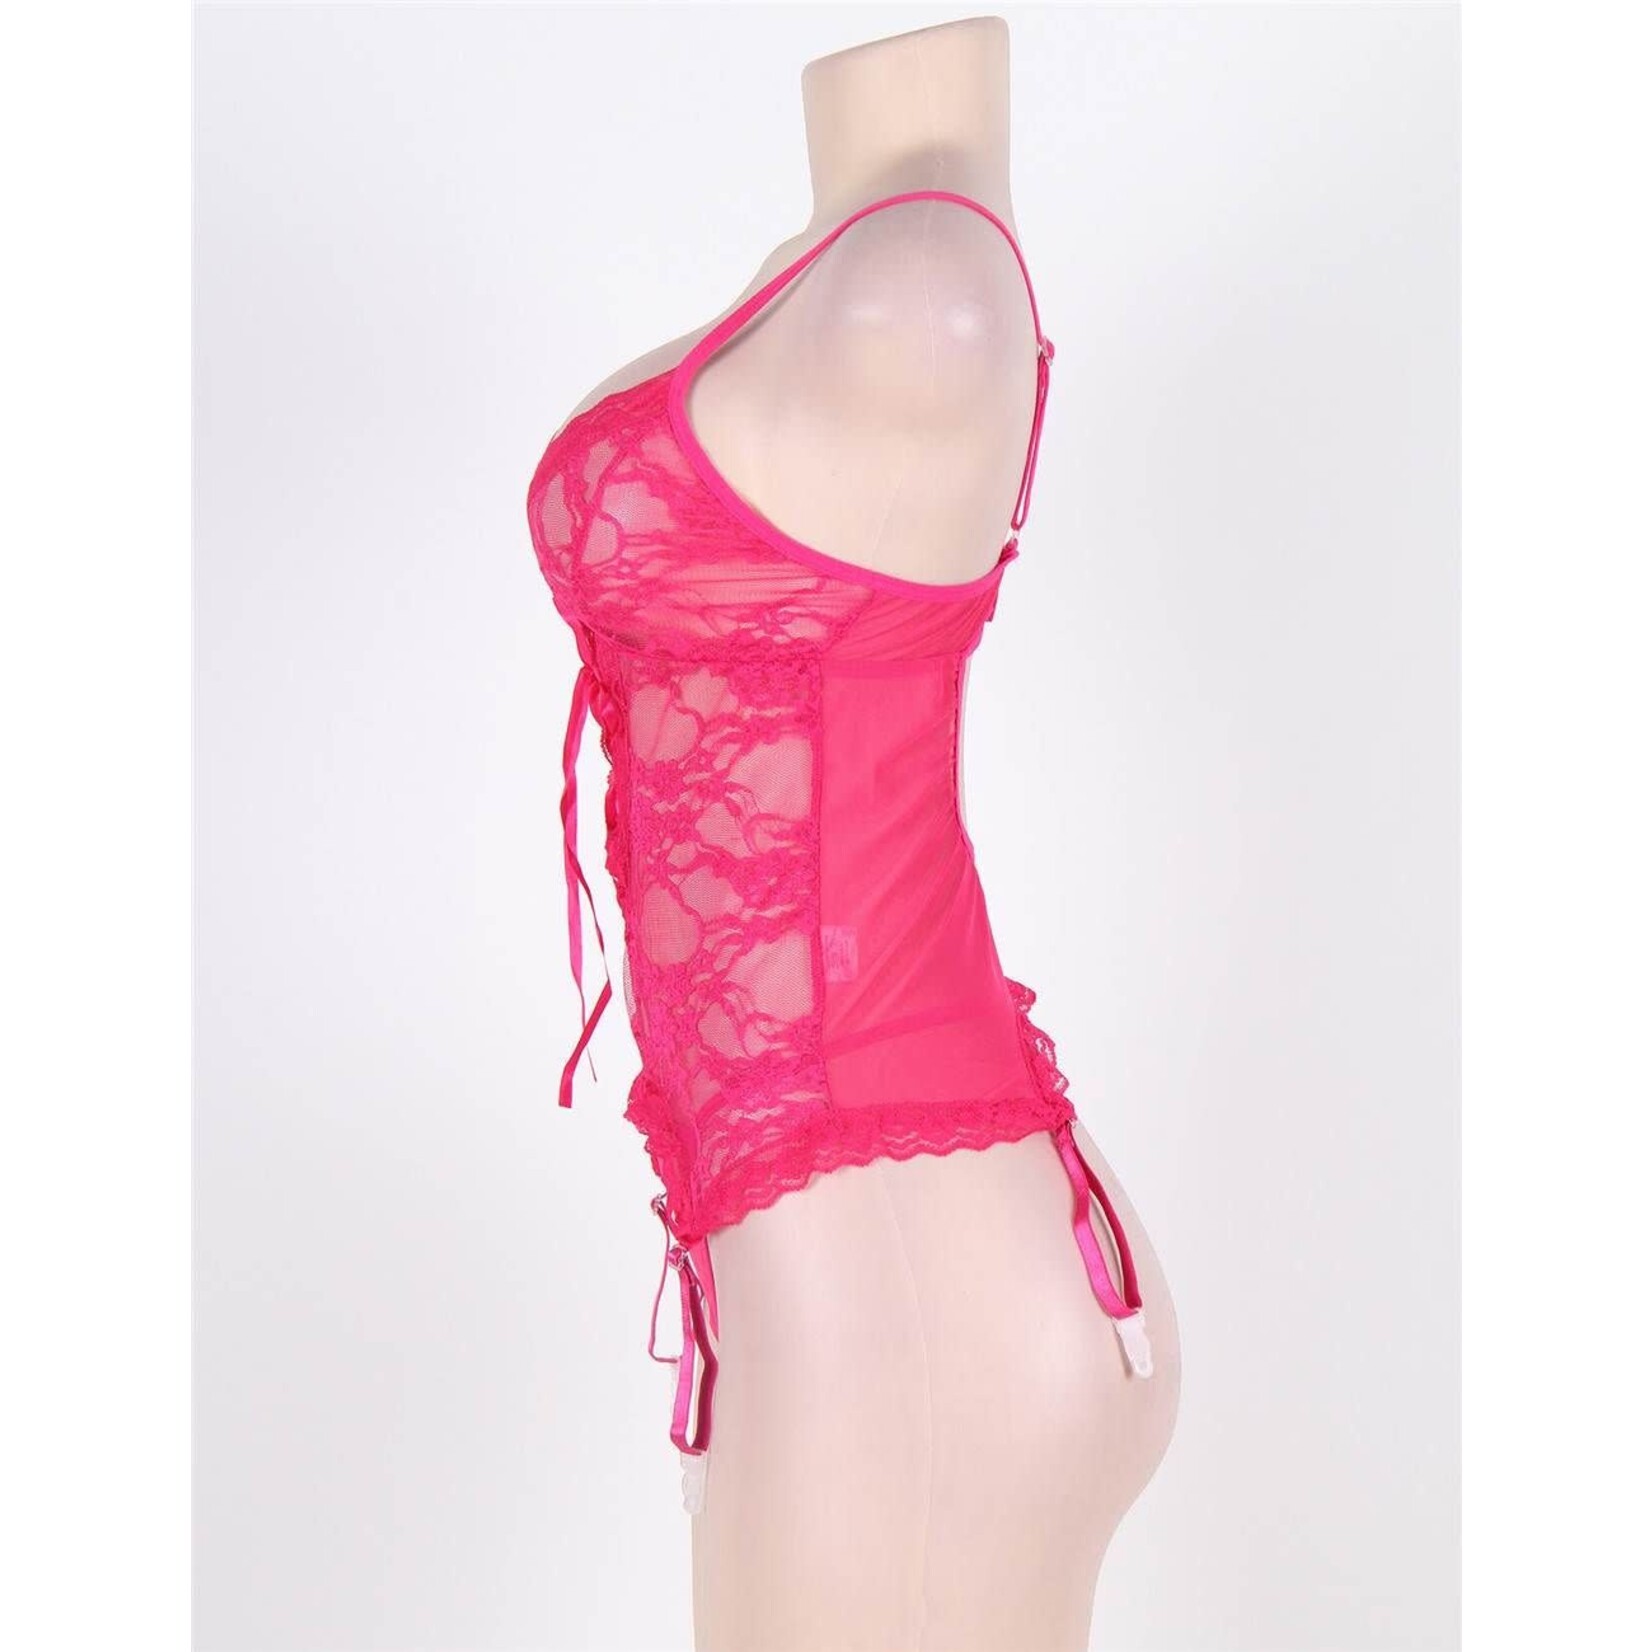 OH YEAH! -  PLUS SIZE ROSY OPEN BACK LACE TEDDY XL